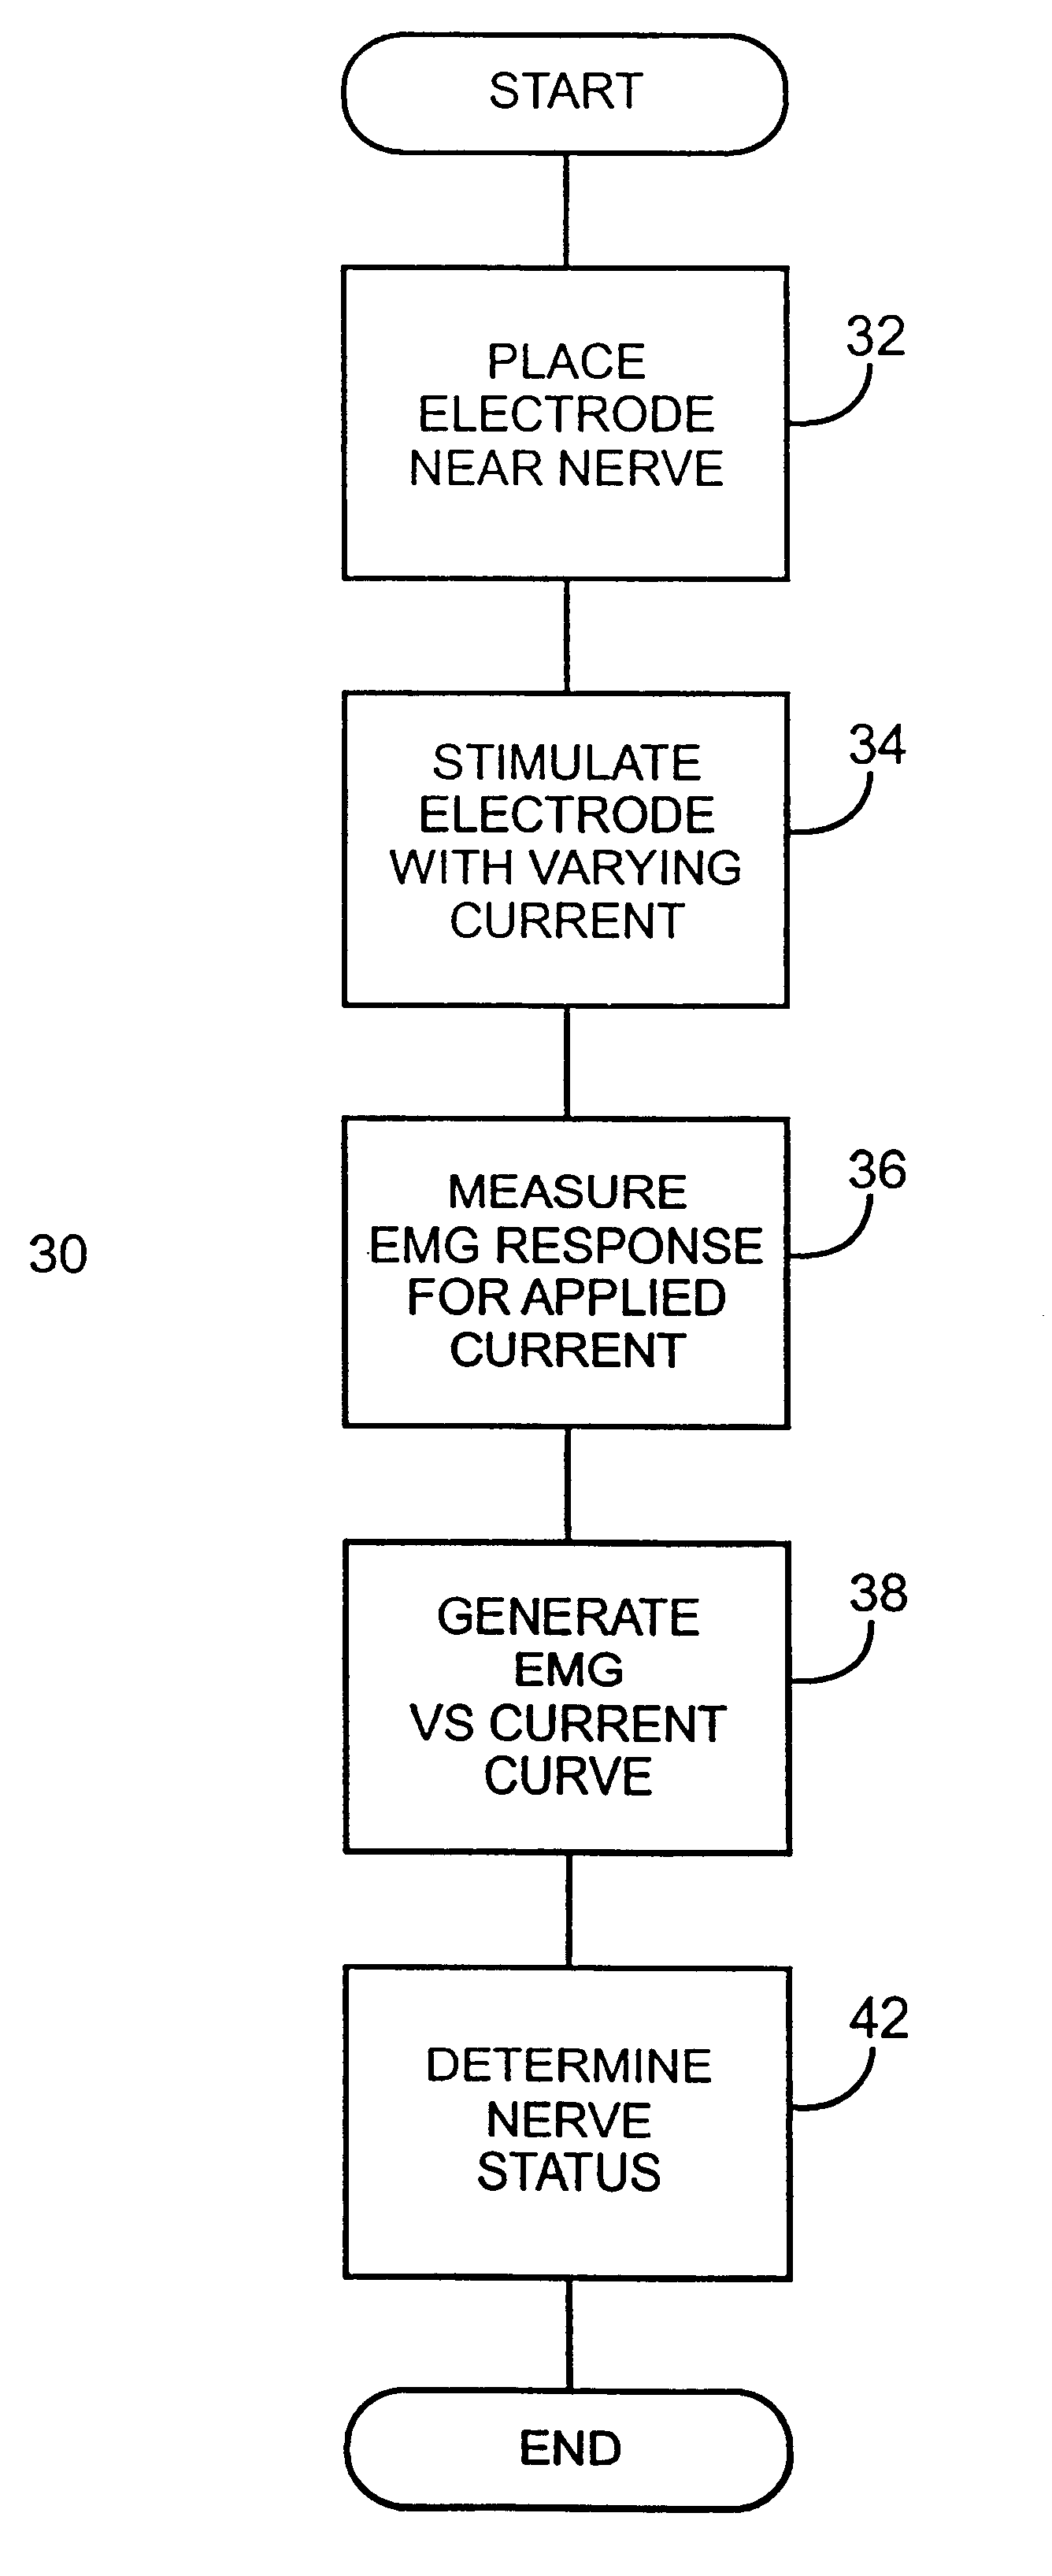 Nerve proximity and status detection system and method